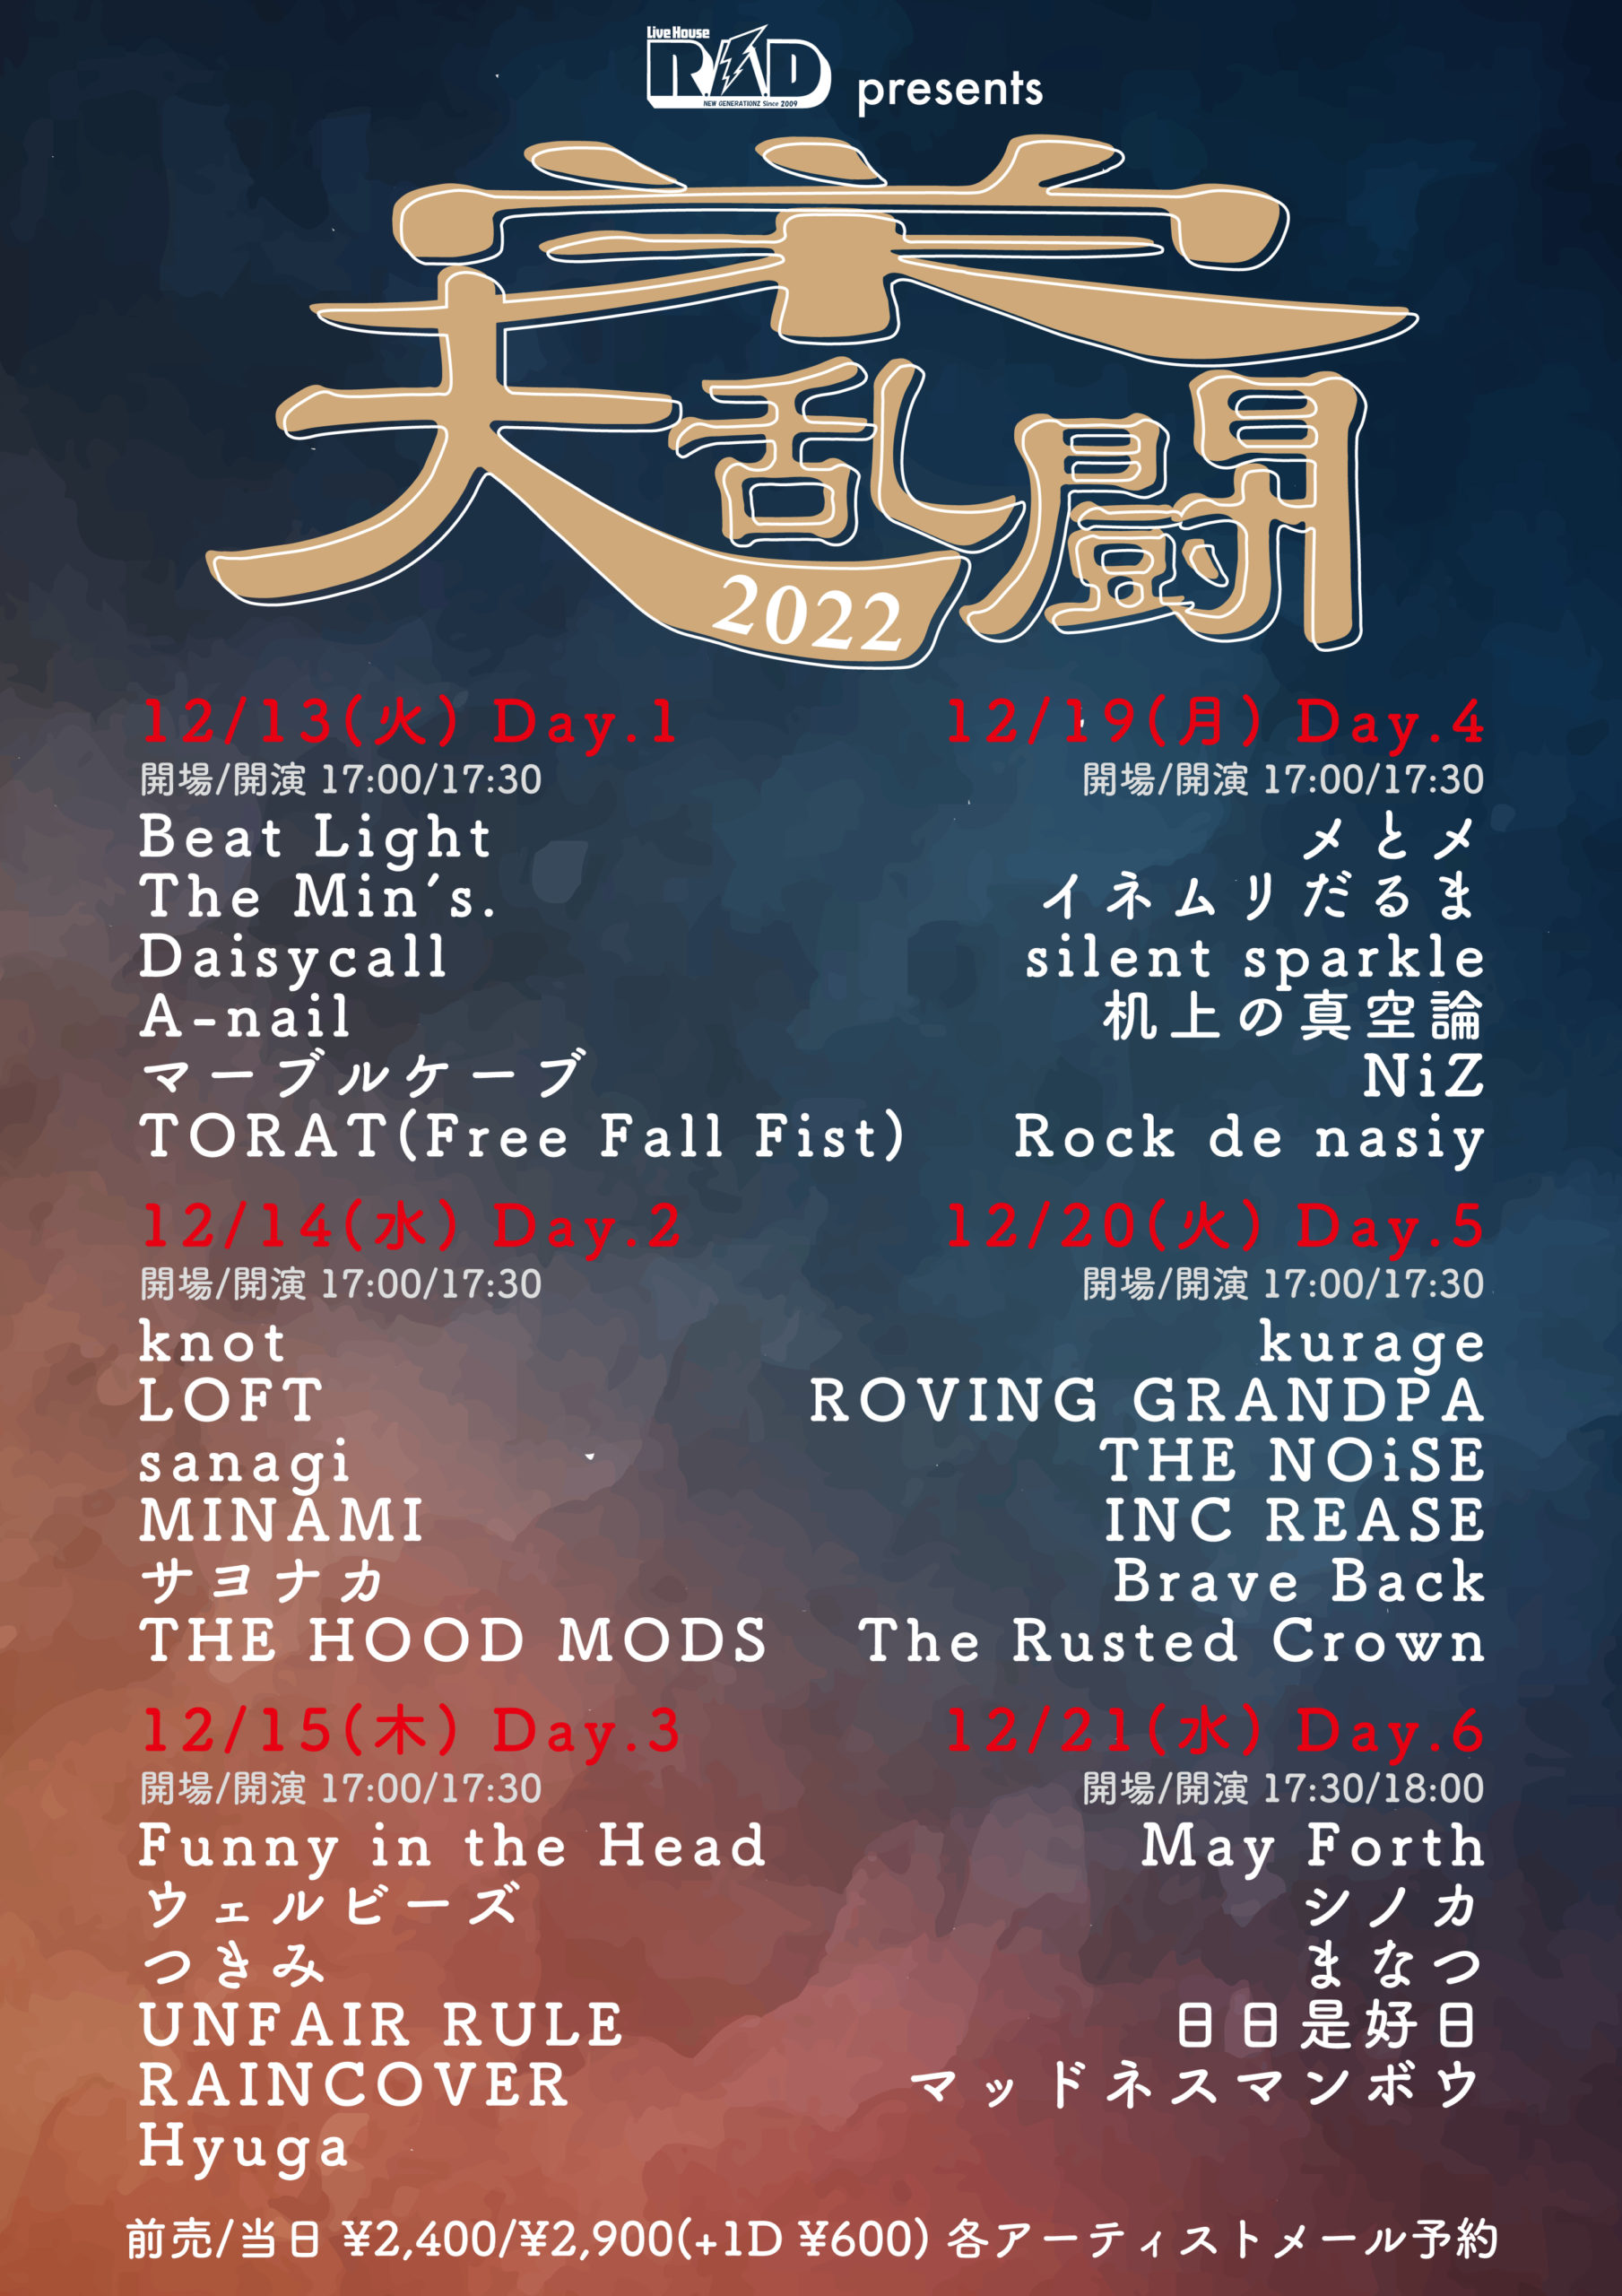 R.A.D presents 栄大乱闘2022 Day.1